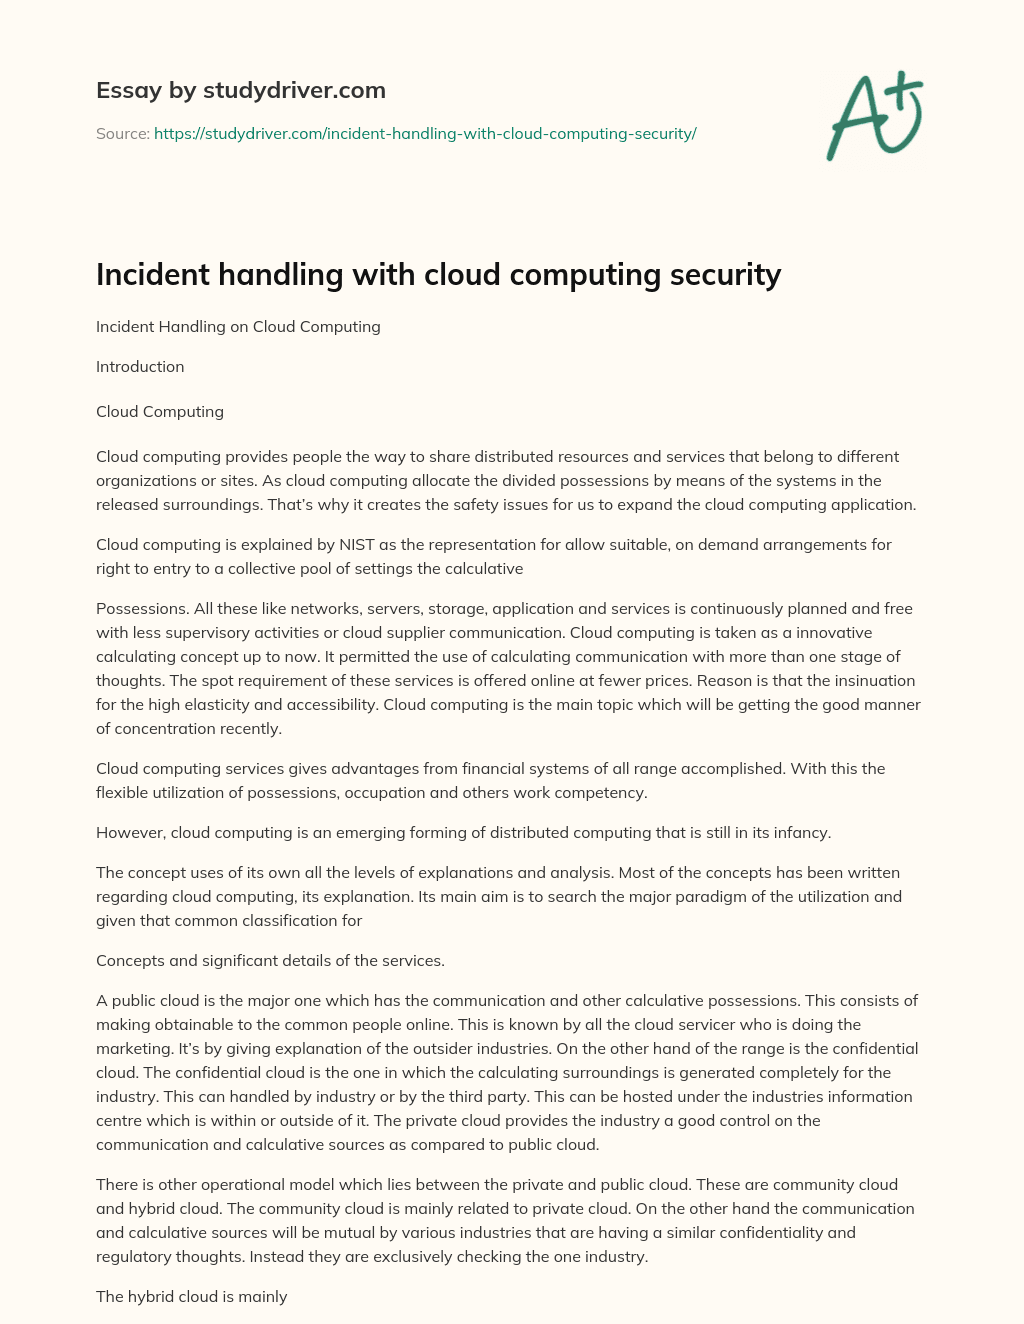 Incident Handling with Cloud Computing Security essay